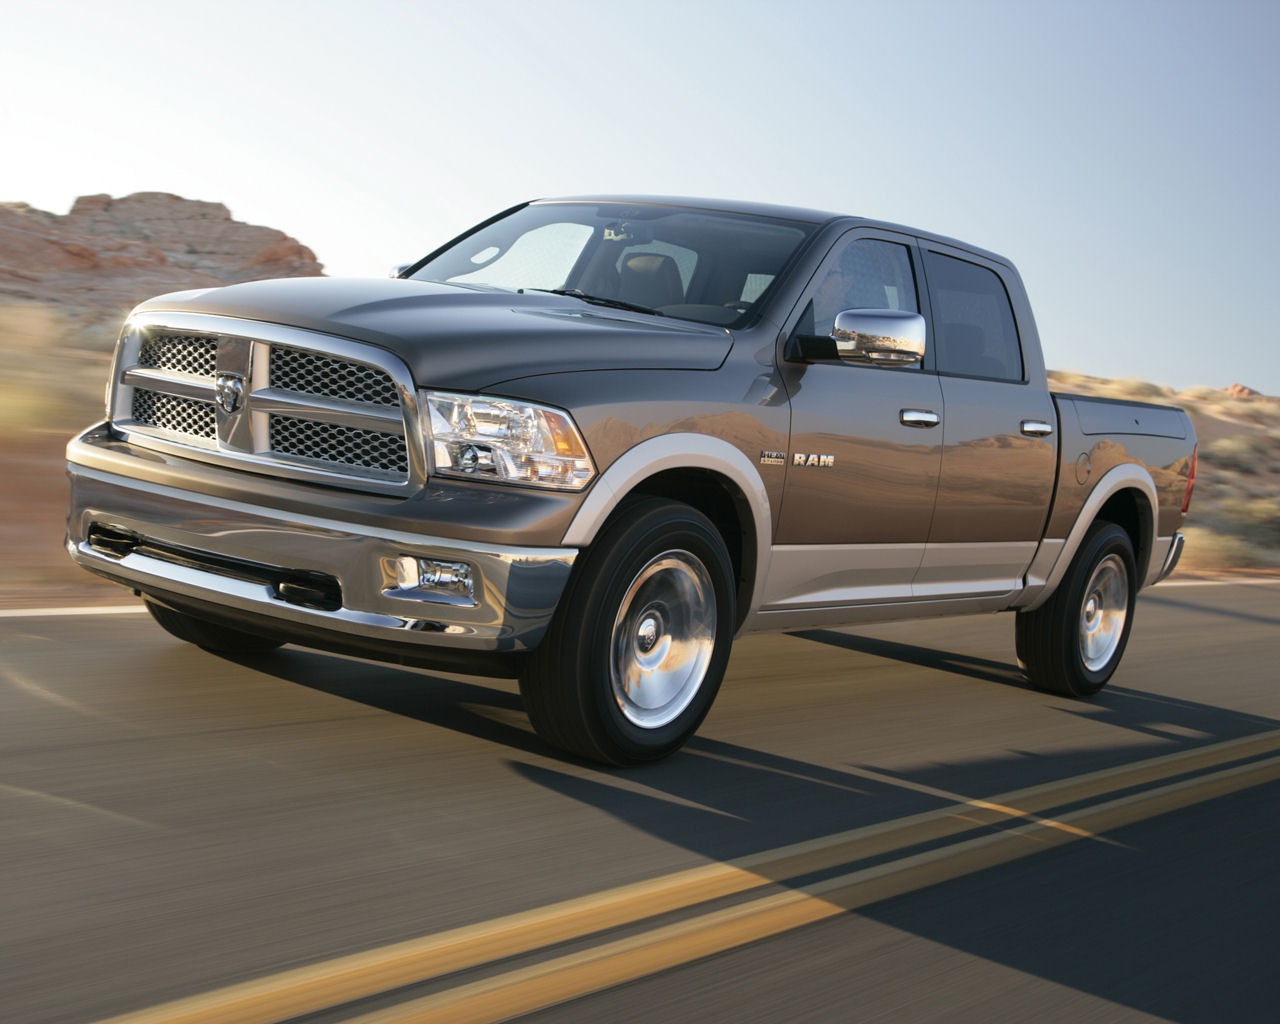 On The Dodge Ram Wallpaper Below And Choose Set As Background